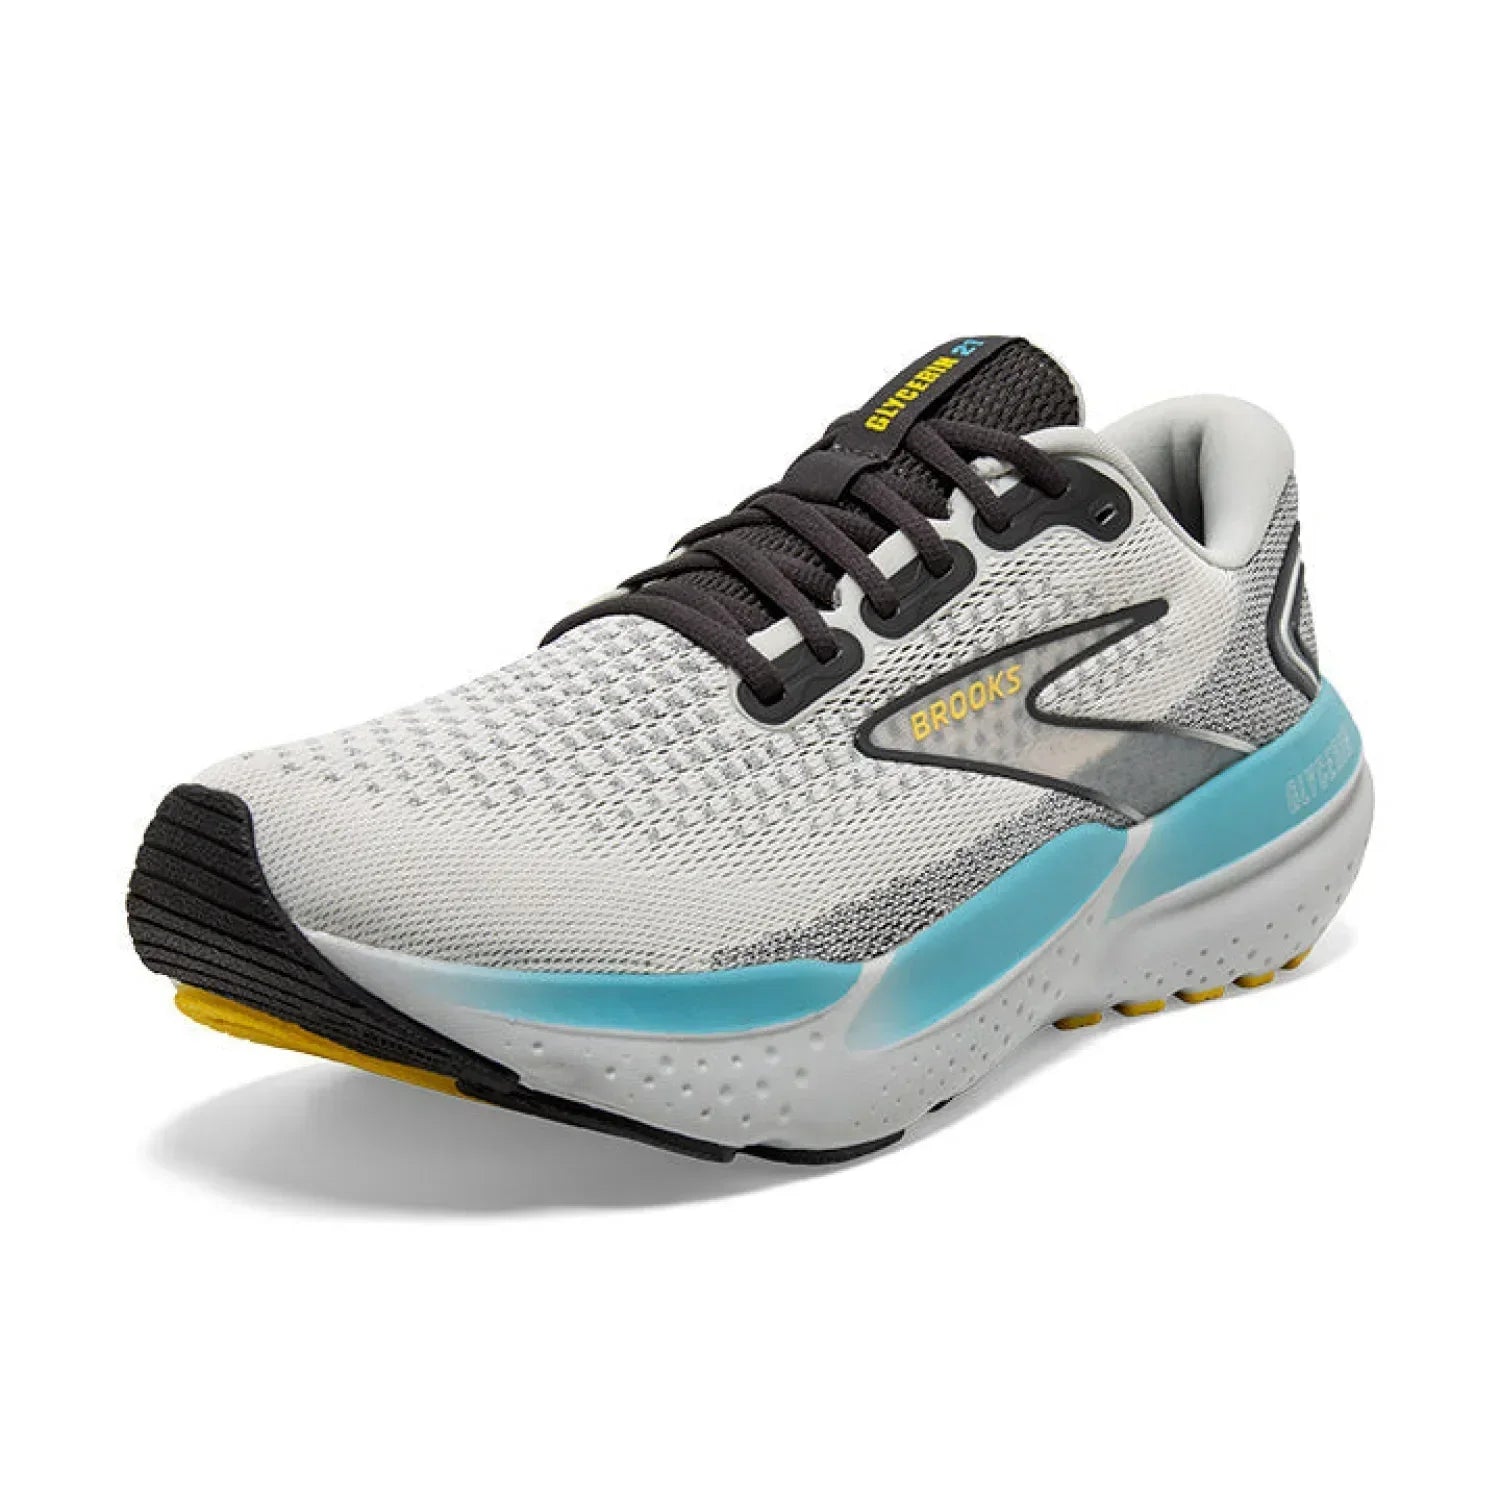 Brooks Running MENS FOOTWEAR - MENS SHOES - MENS SHOES RUNNING Men's Glycerin 21 COCONUT|FORGED IRON|YELLOW